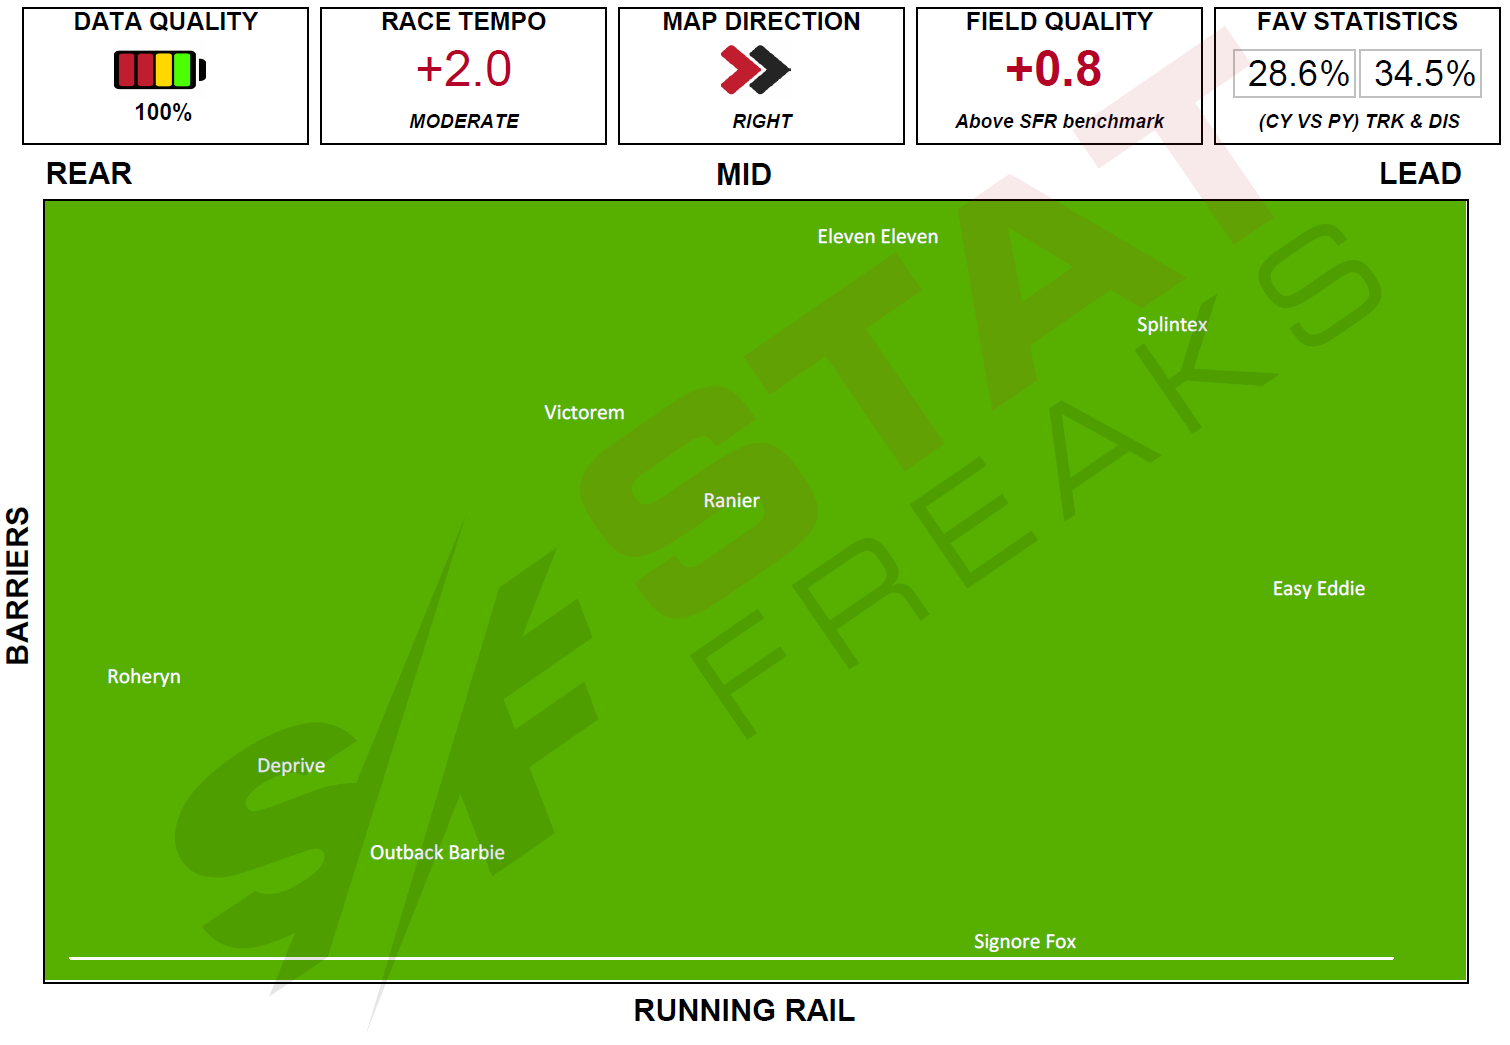 Click here to enlarge Royal Randwick Race 5 Speed Map 24th April 2021 Statfreaks.com.au